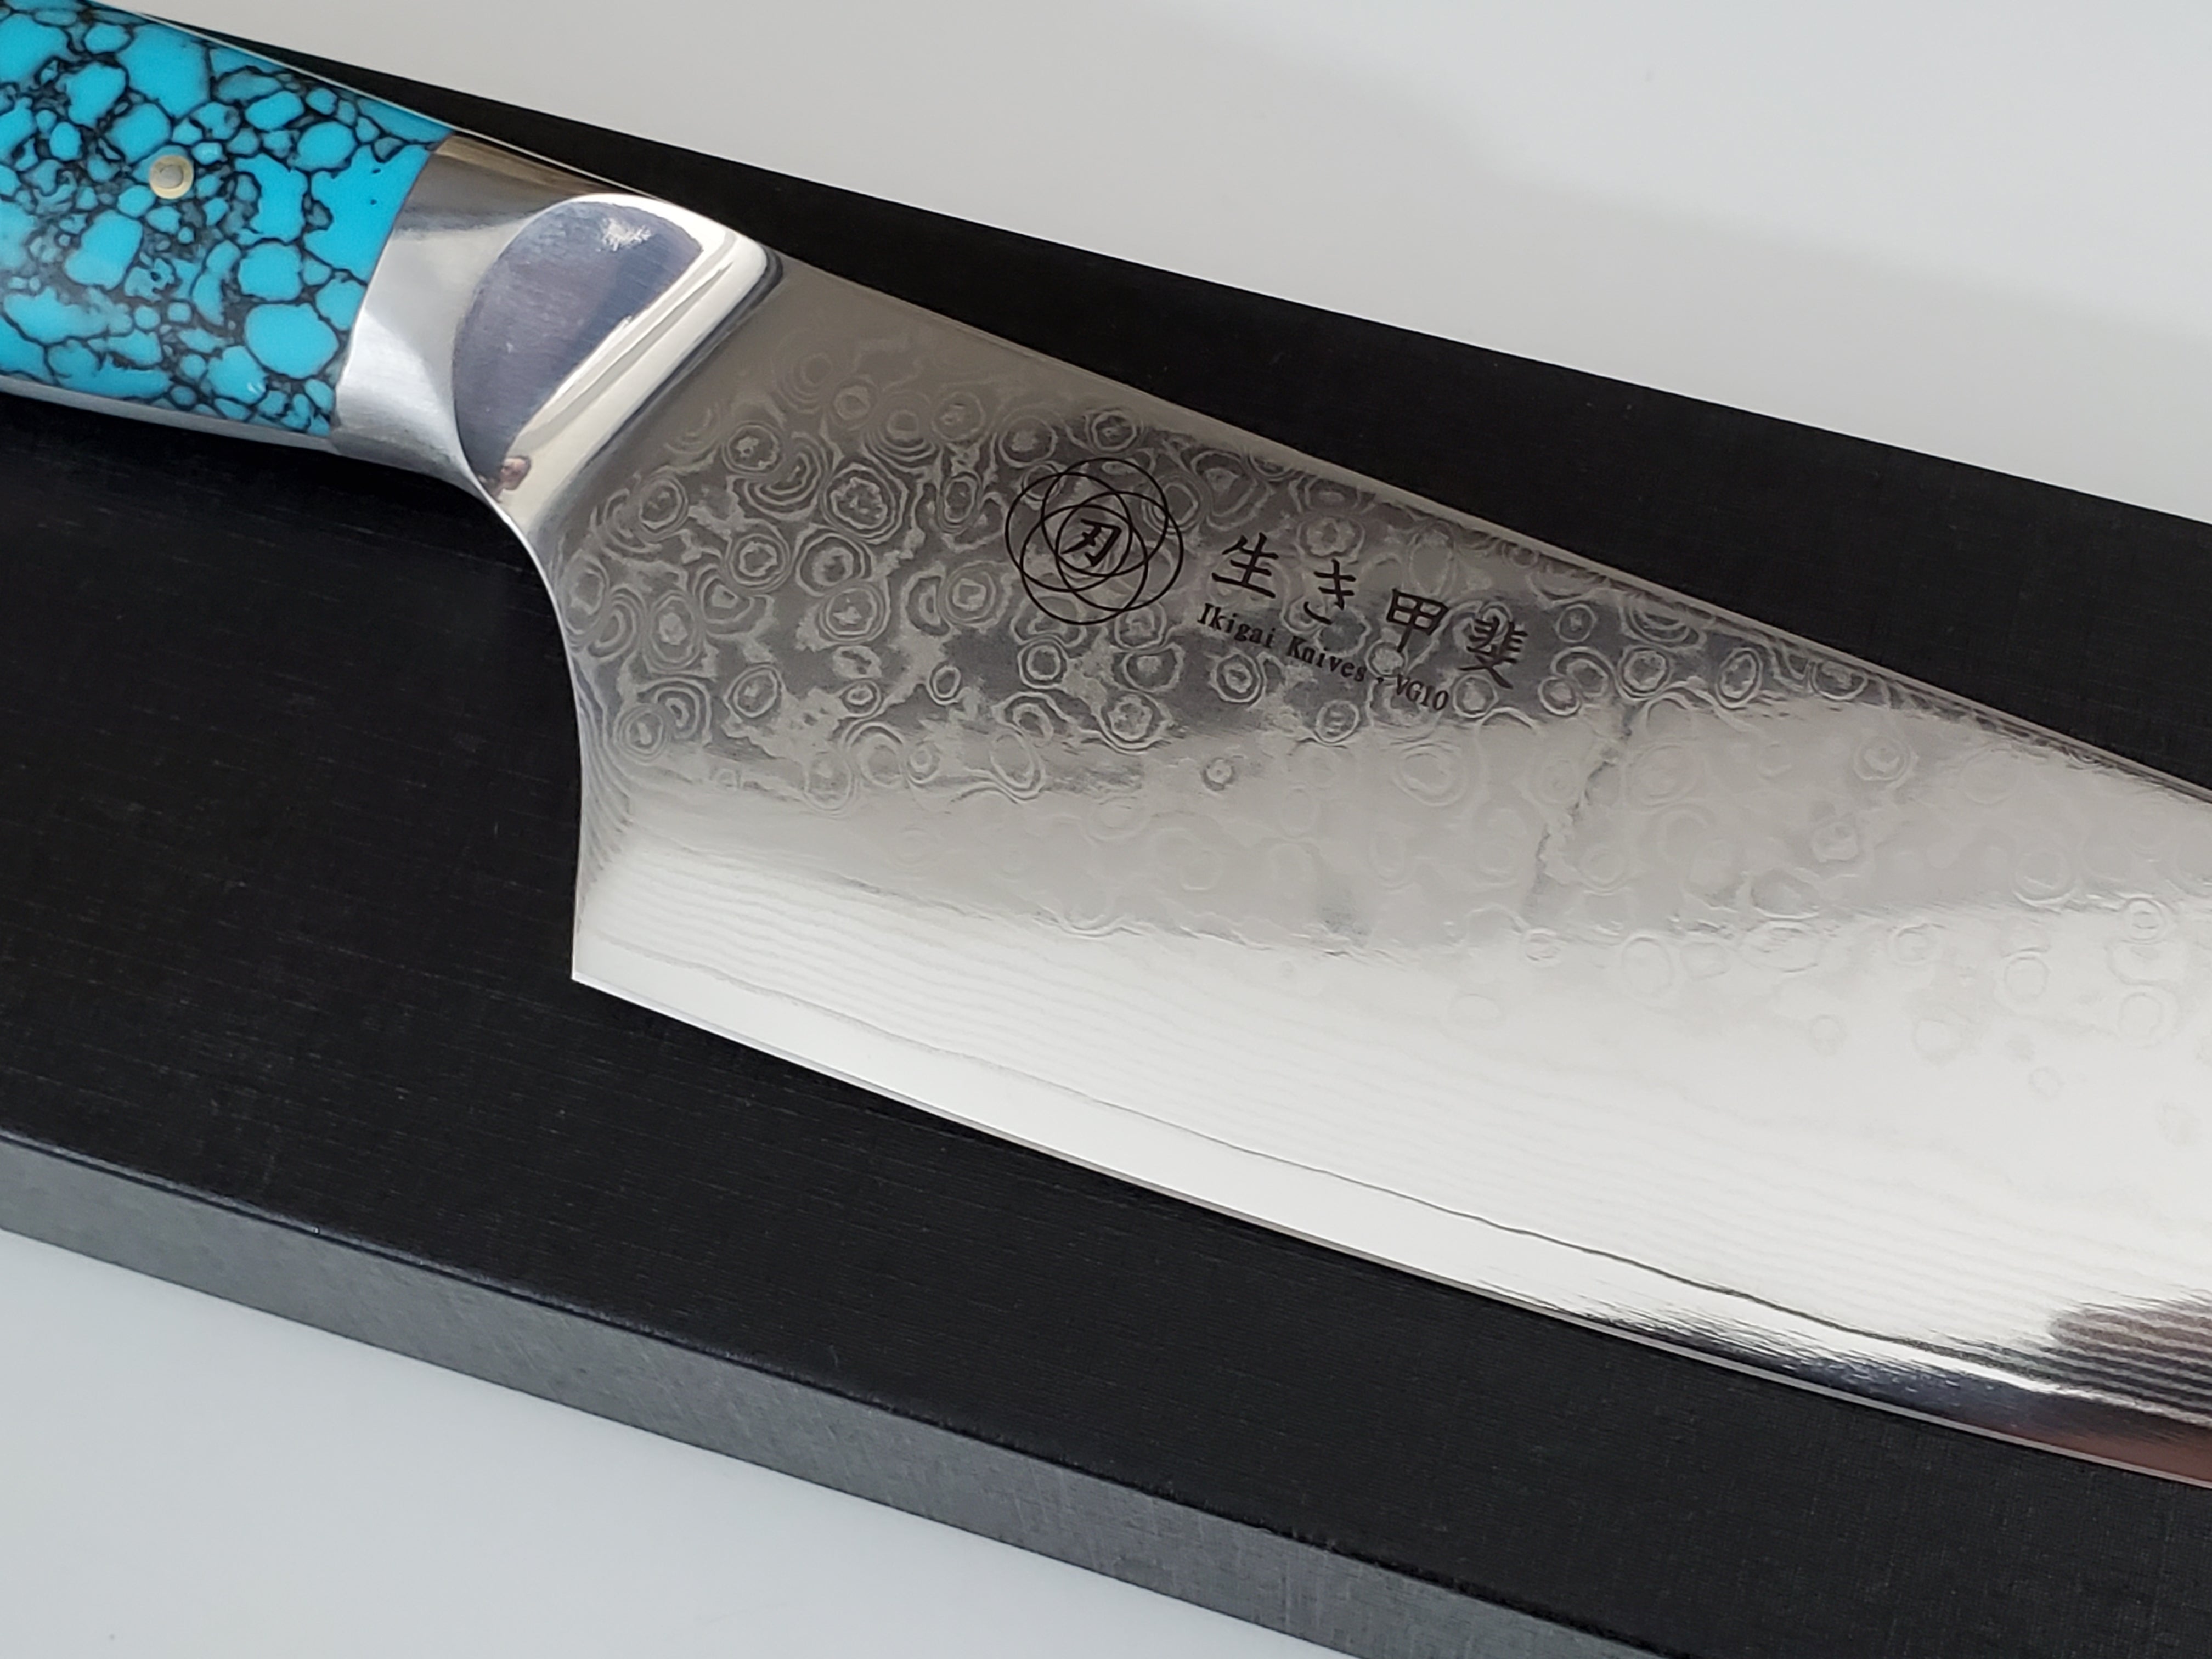  Custom Damascus chef knife Ikigai Knives VG10 2pc set Pinecone  and resin handle hand crafted resinart (Blue SIlver) : Handmade Products